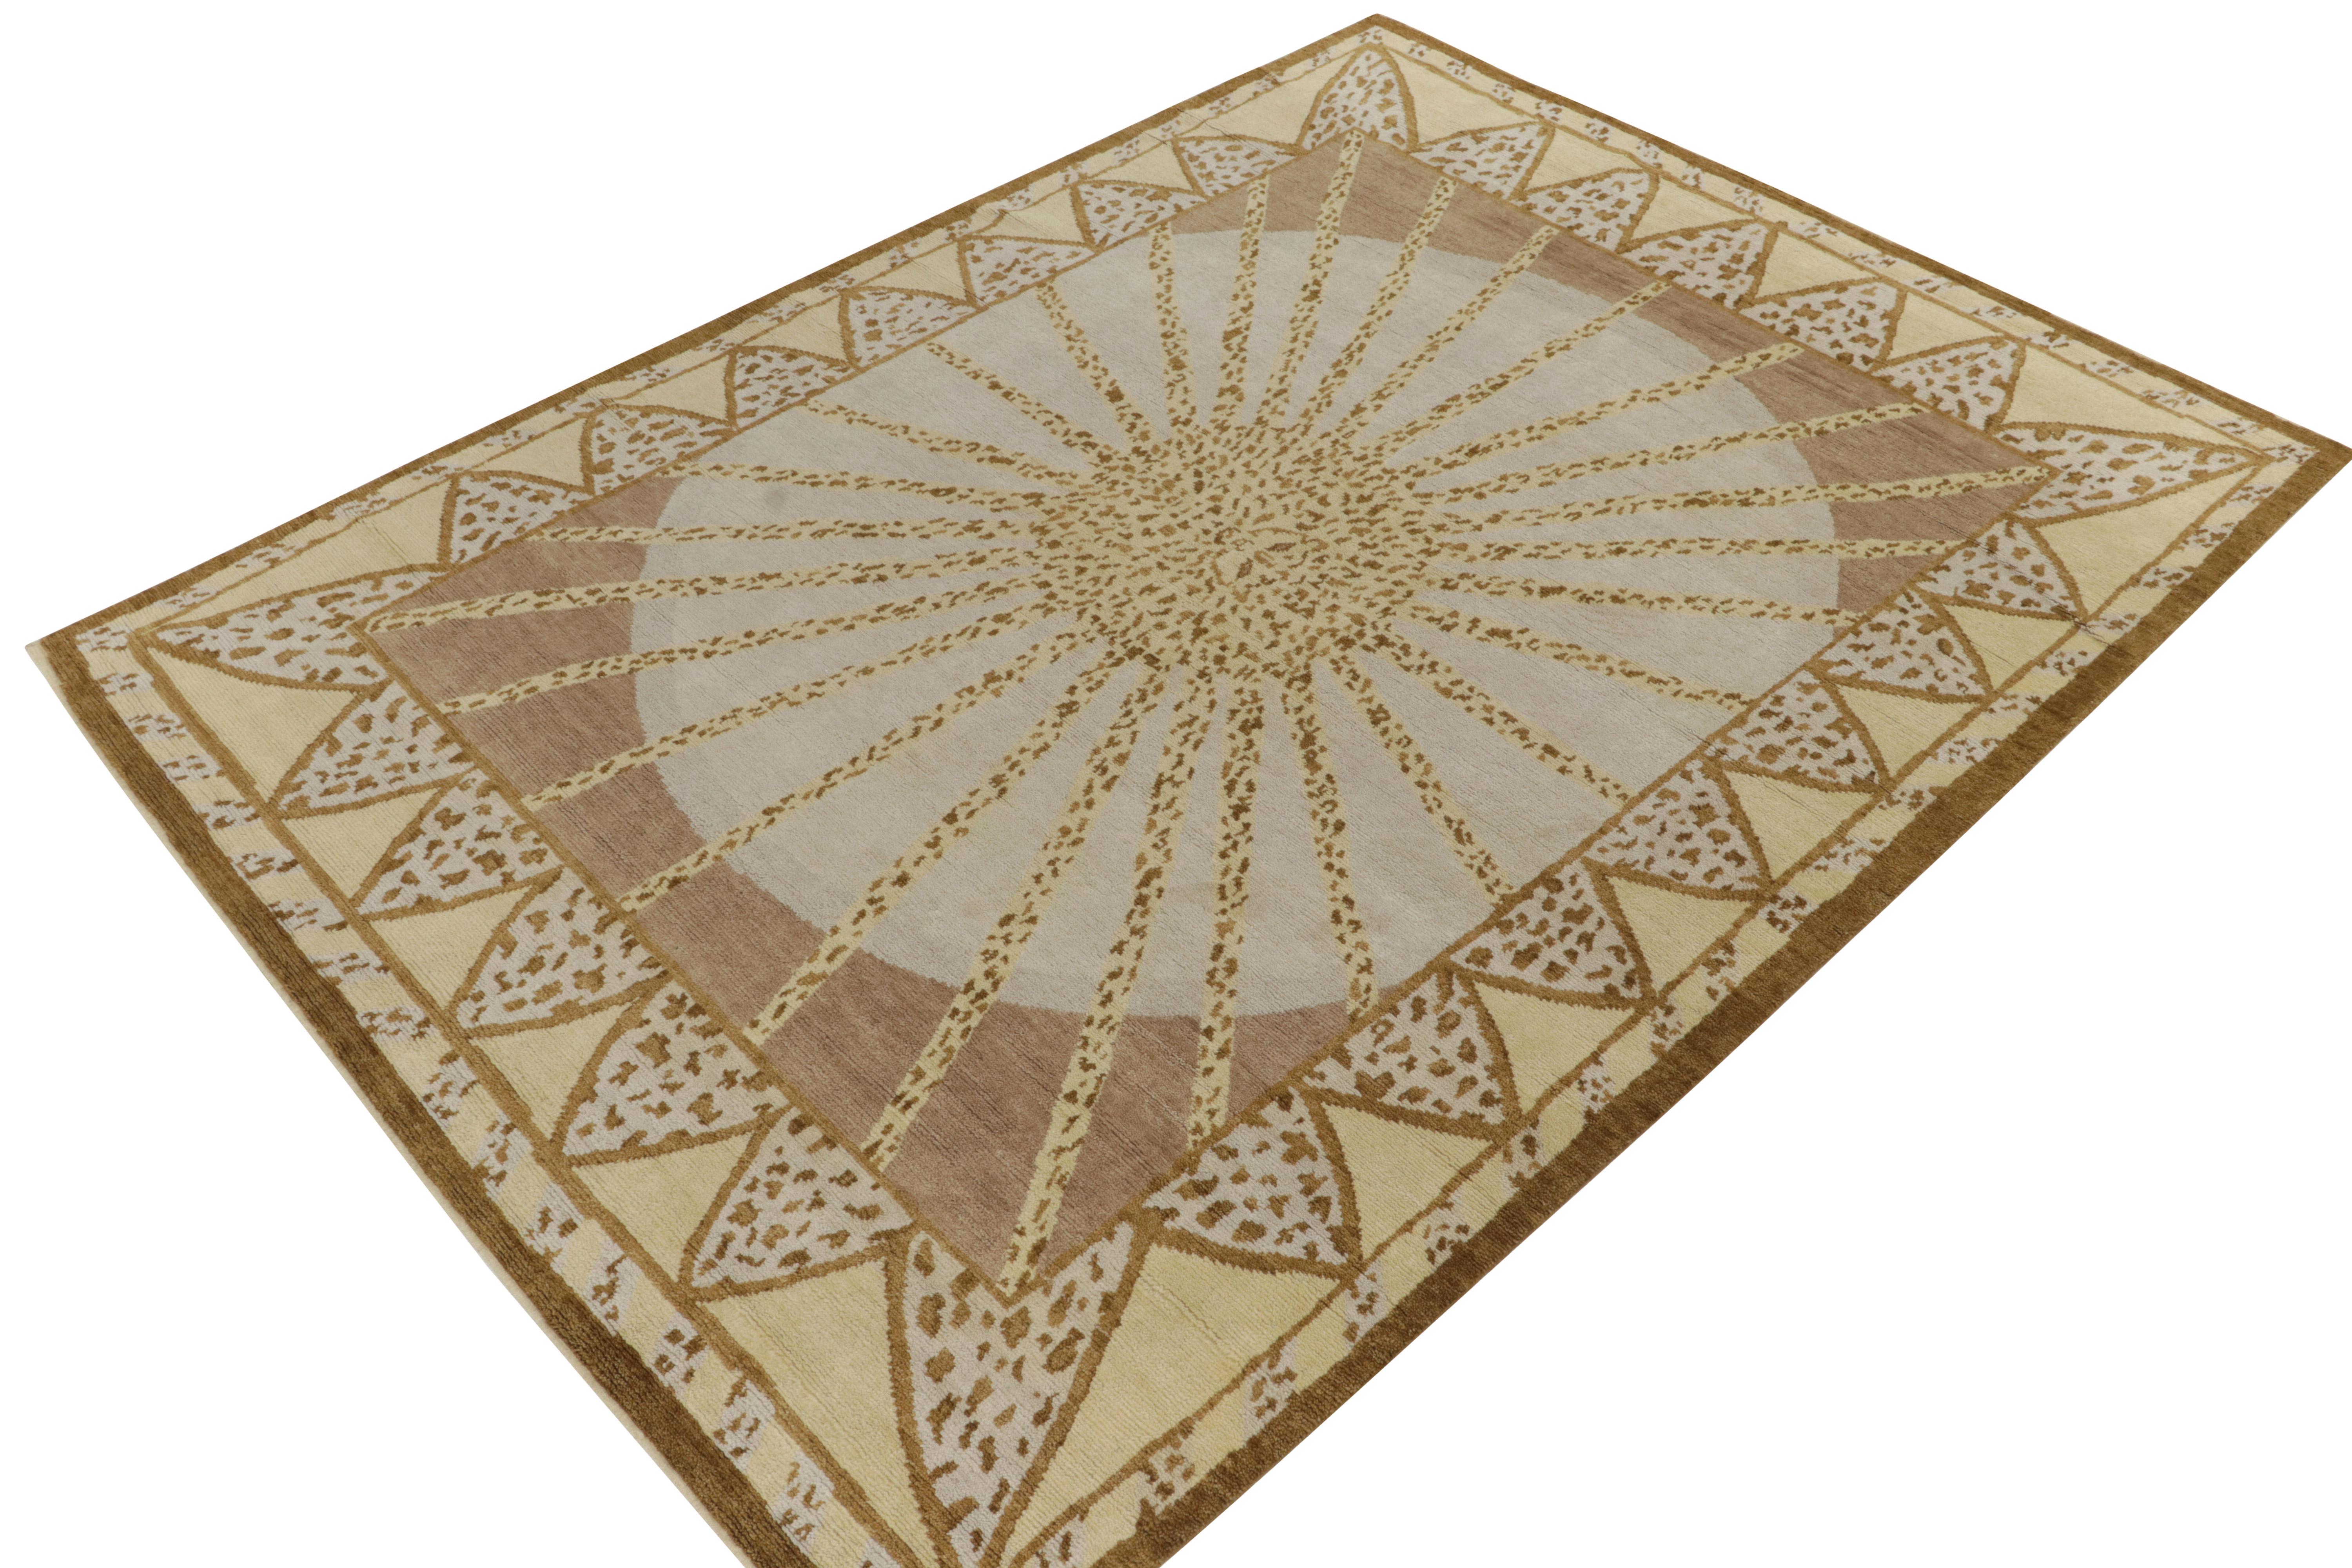 Hand-knotted in wool, a 9x12 ode to French Art Deco rugs, joining the inspired new Deco Collection by Rug & Kilim. Enjoying a geometric pattern like that of the rising sun in warm goldenrod & off white with beige-brown accents. An exemplar of our